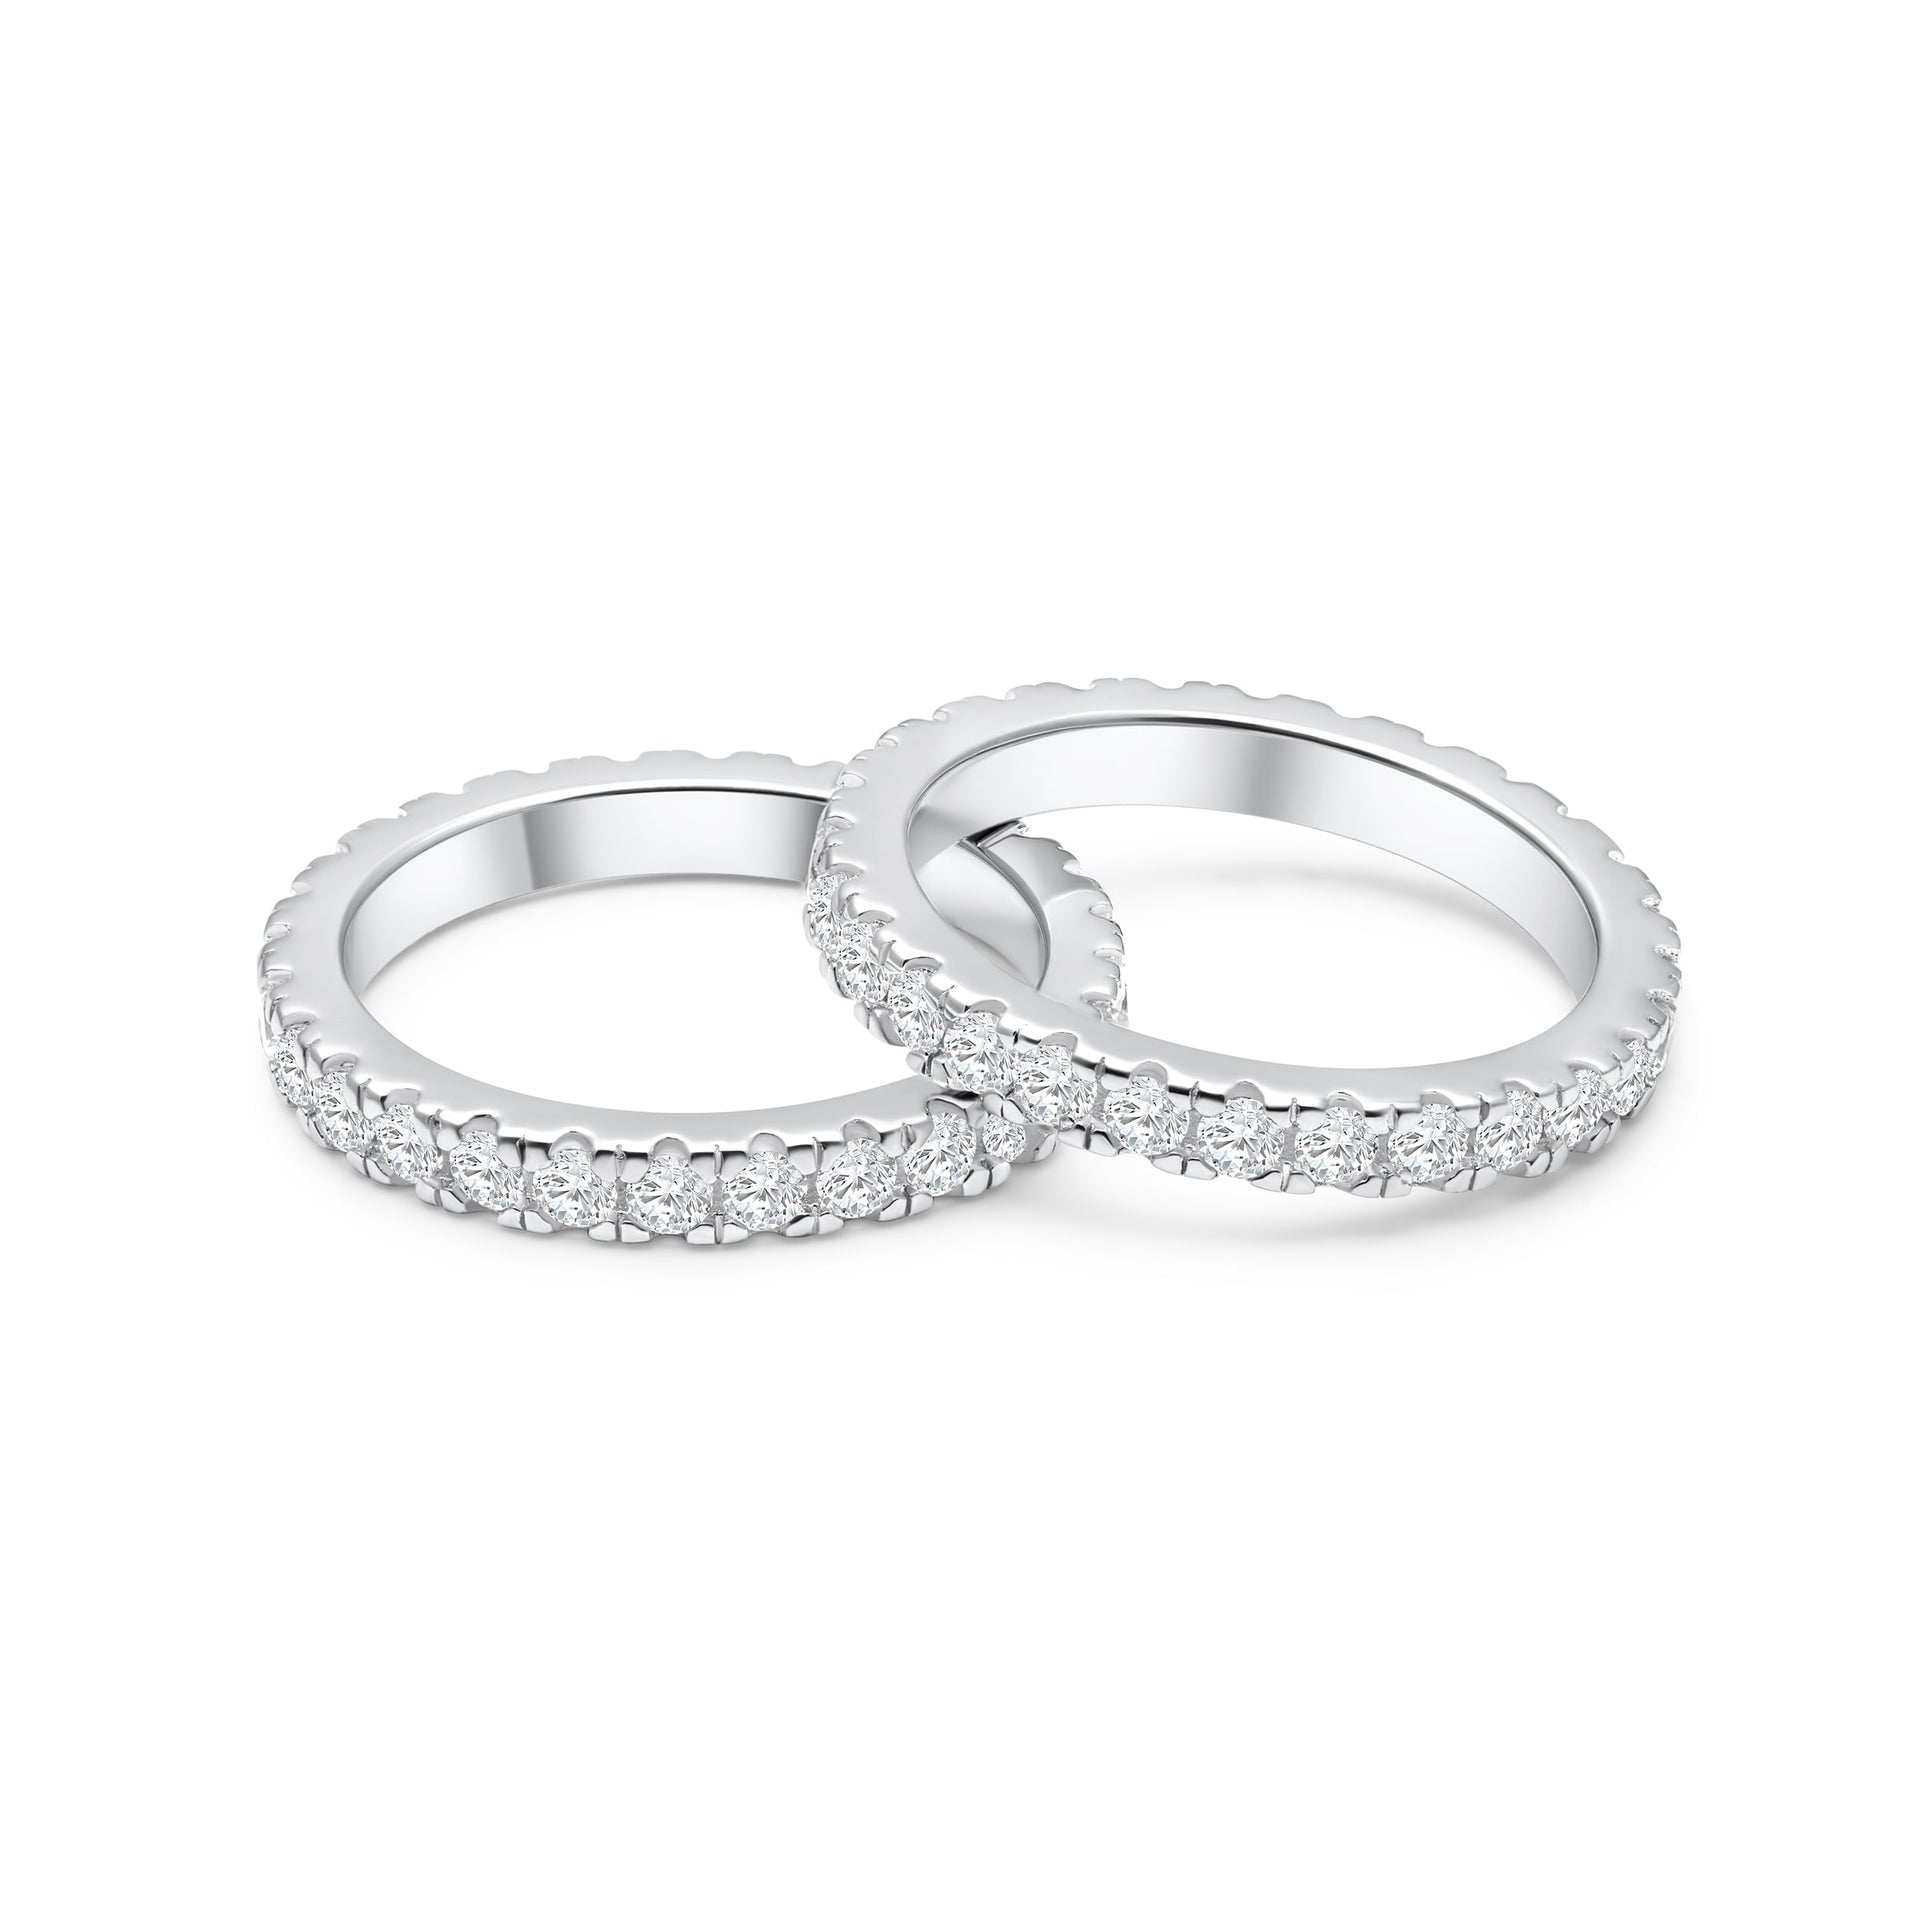 top view of a silver eternity wedding band set of two